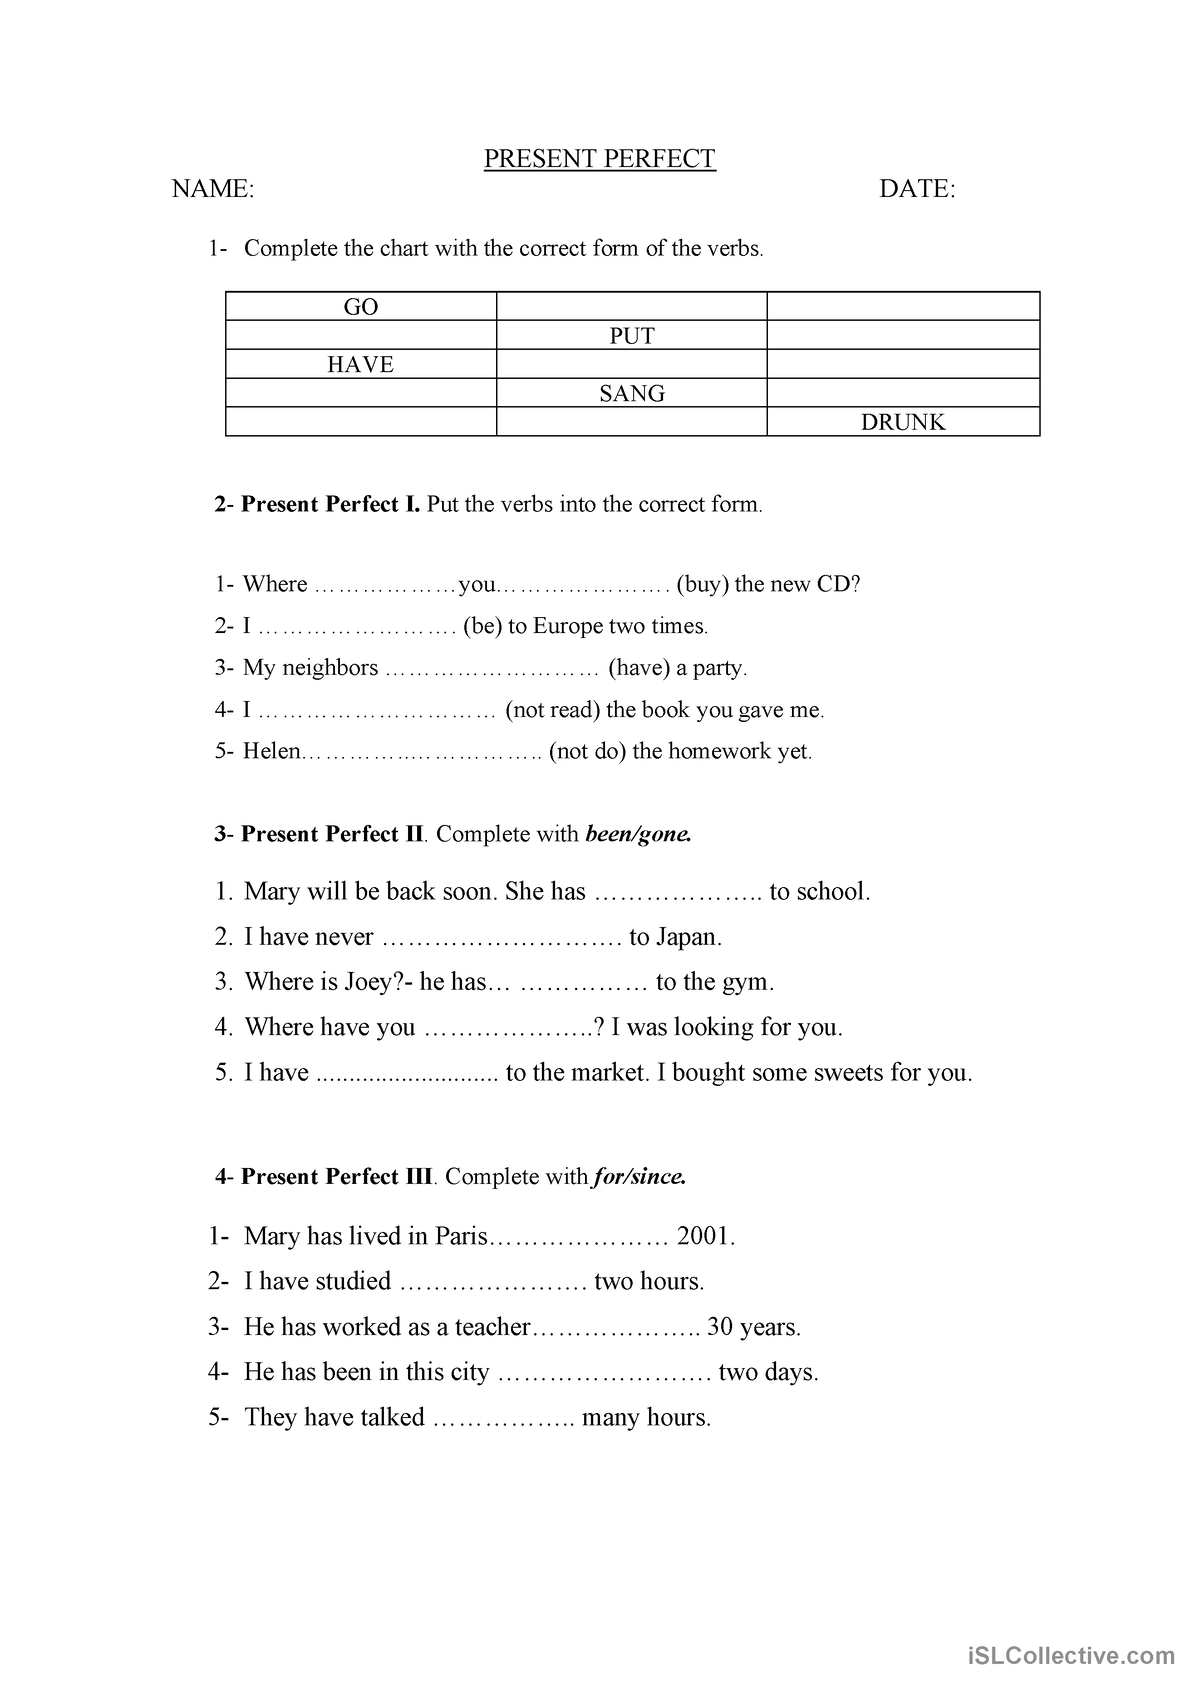 The Present Perfect (test or revision) - PRESENT PERFECT NAME: DATE: 1 ...